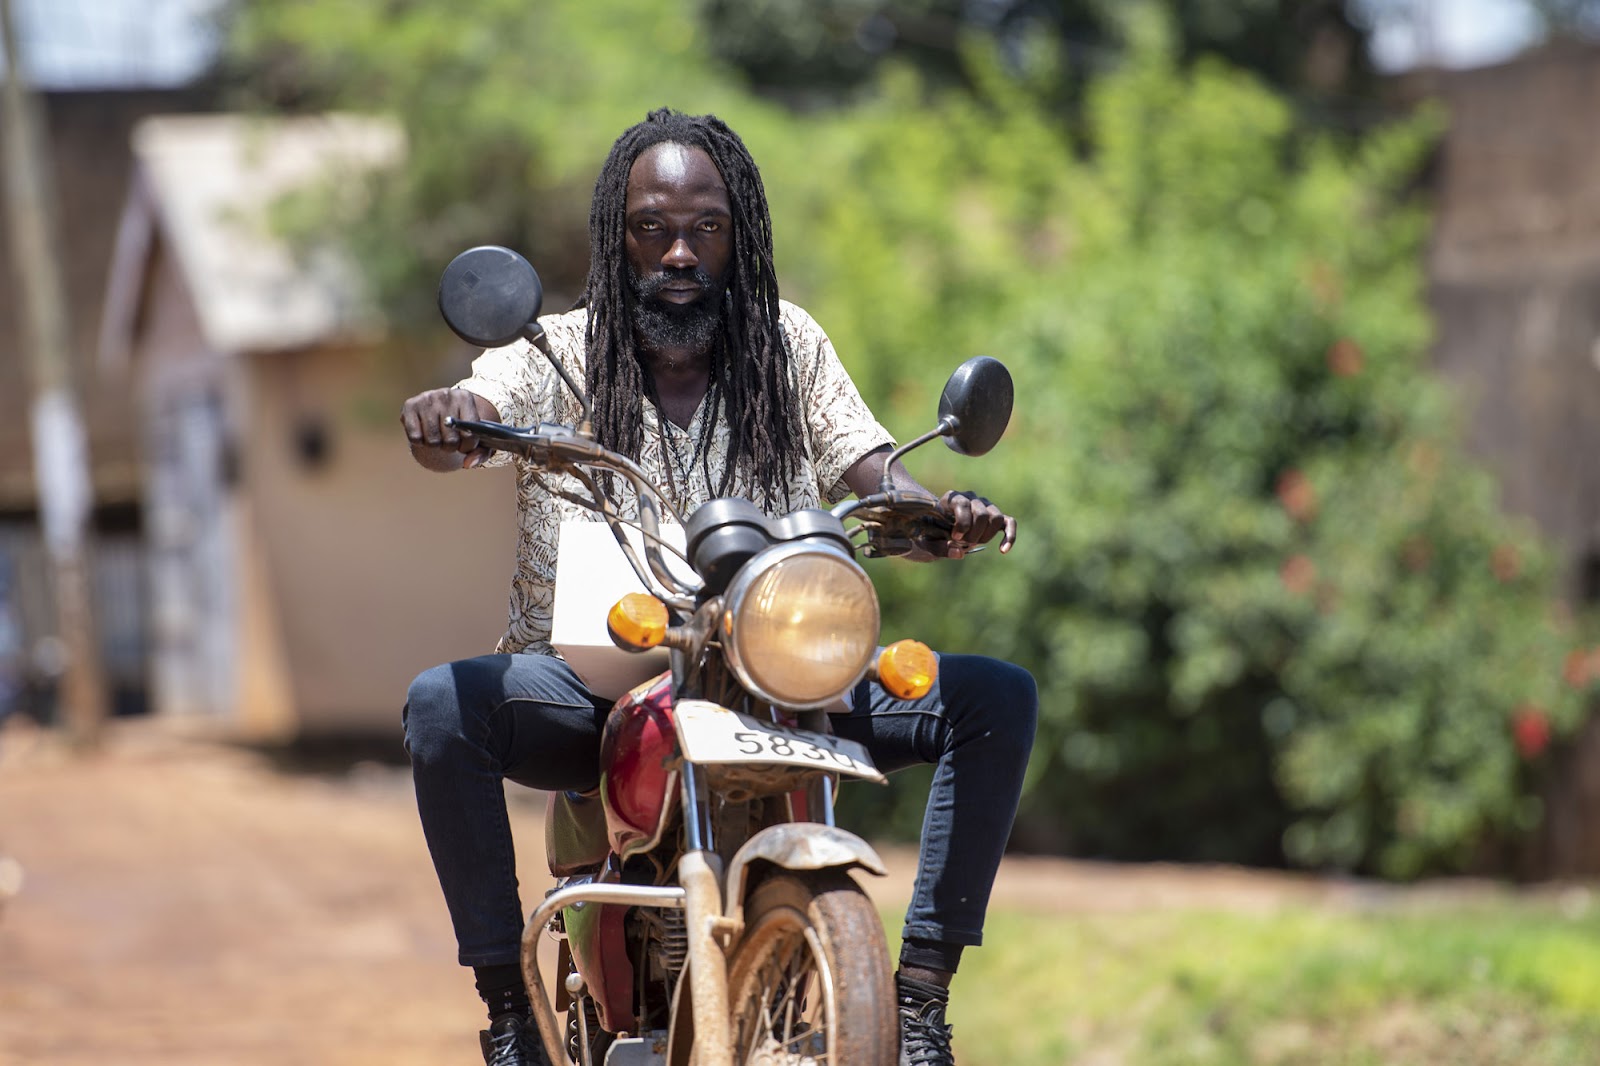 Ivan Lubulwa, also referred to as Dogota, rides his bike in Kampala, Uganda. He has worn dreadlocks since 2017 and works as a boda boda rider, a commercial motorcycle driver. Kampala, Uganda 23 October 2023. Photograph by Nicholas Bamulanzeki / CCIJ